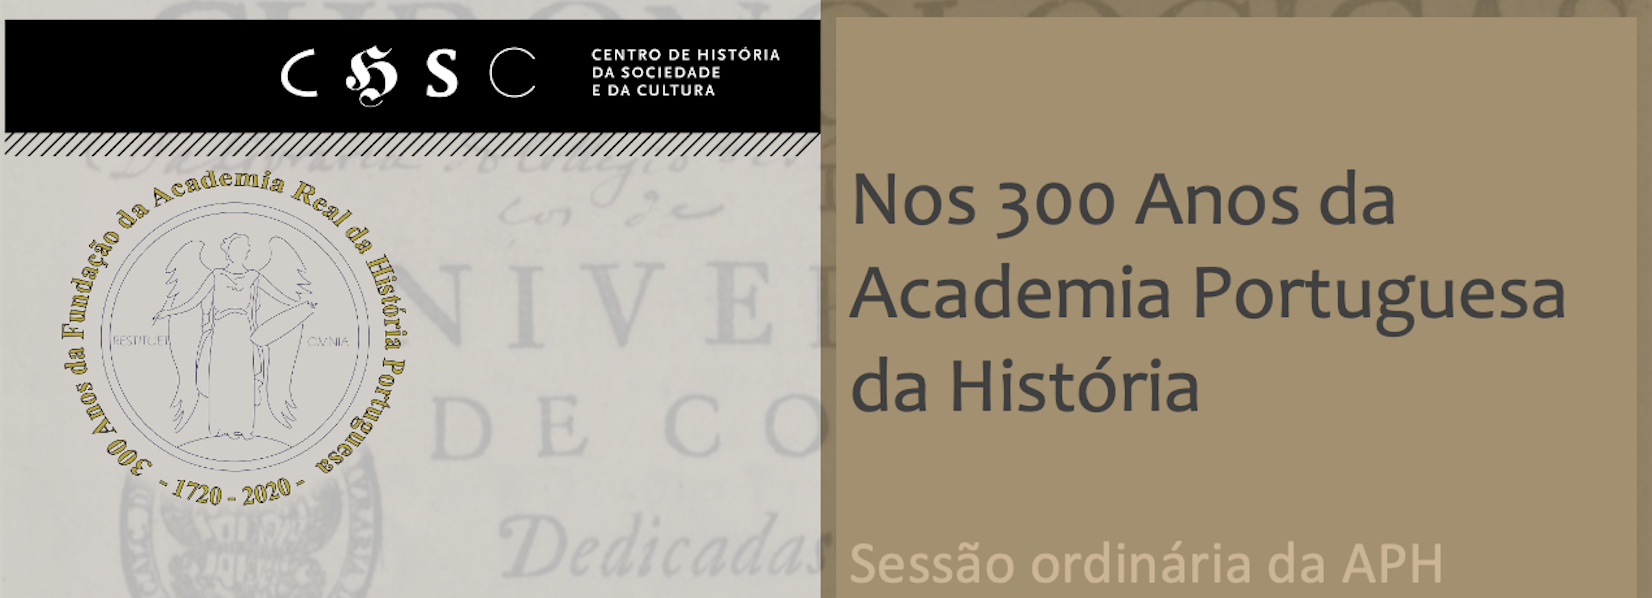 300 years of the Portuguese Academy of History